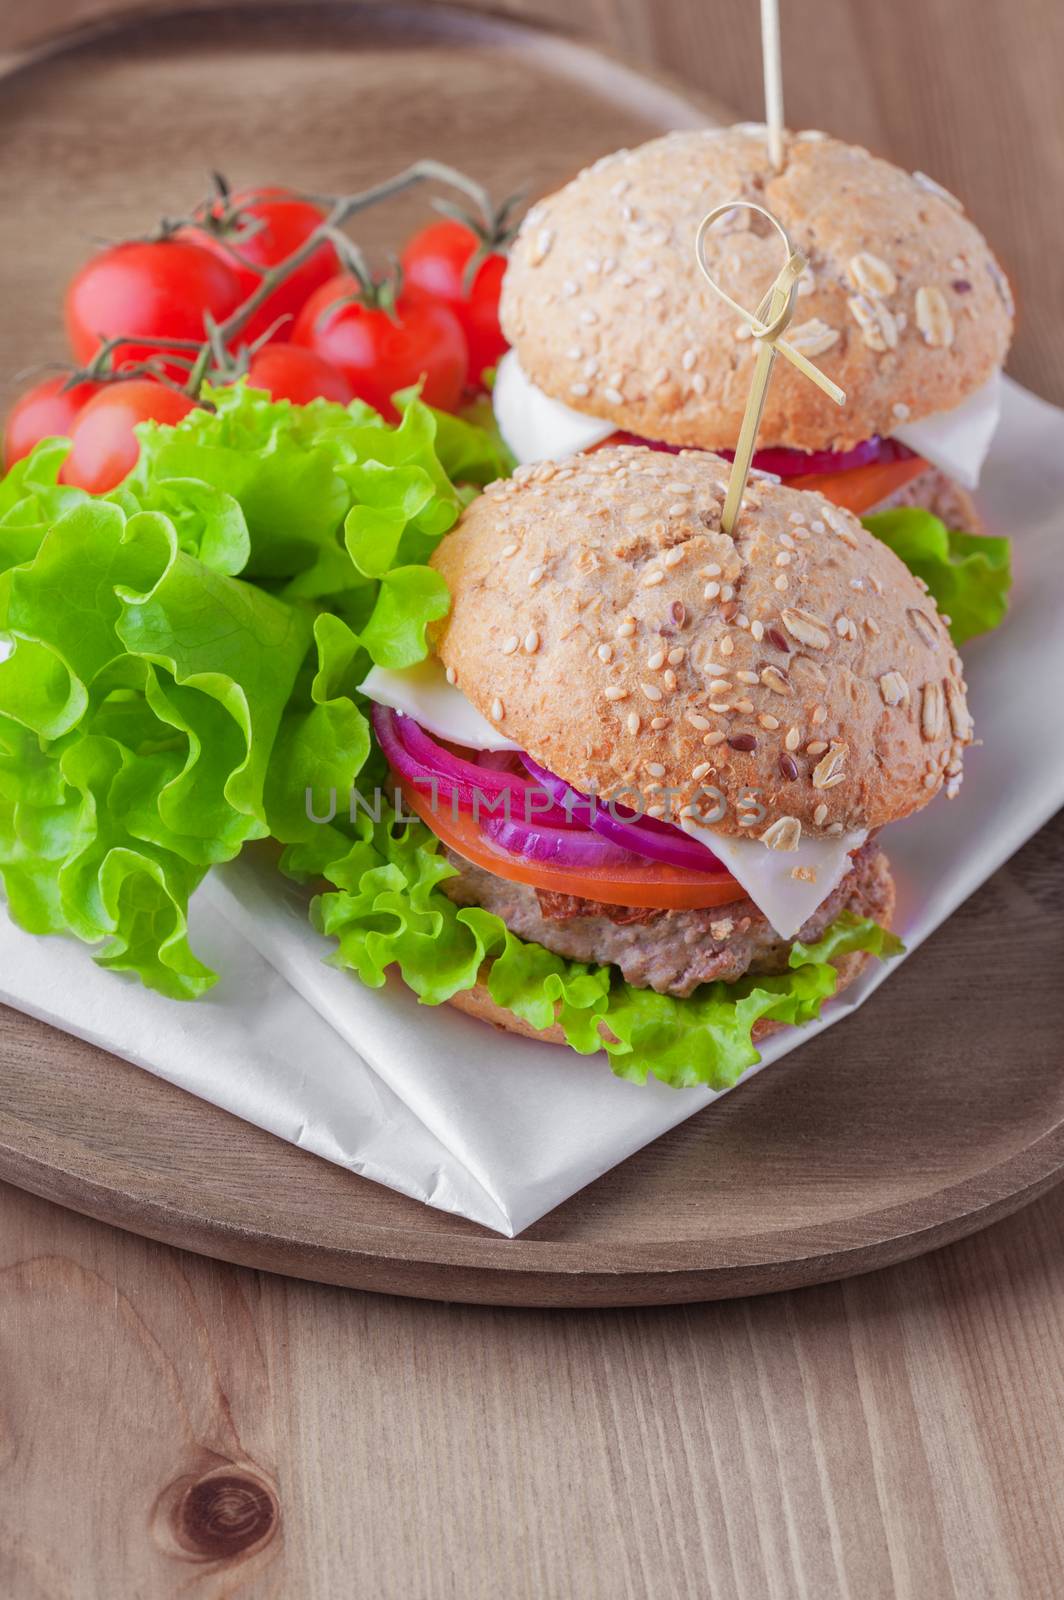 Cheeseburger with salad, onion, tomato and fresh bread by supercat67